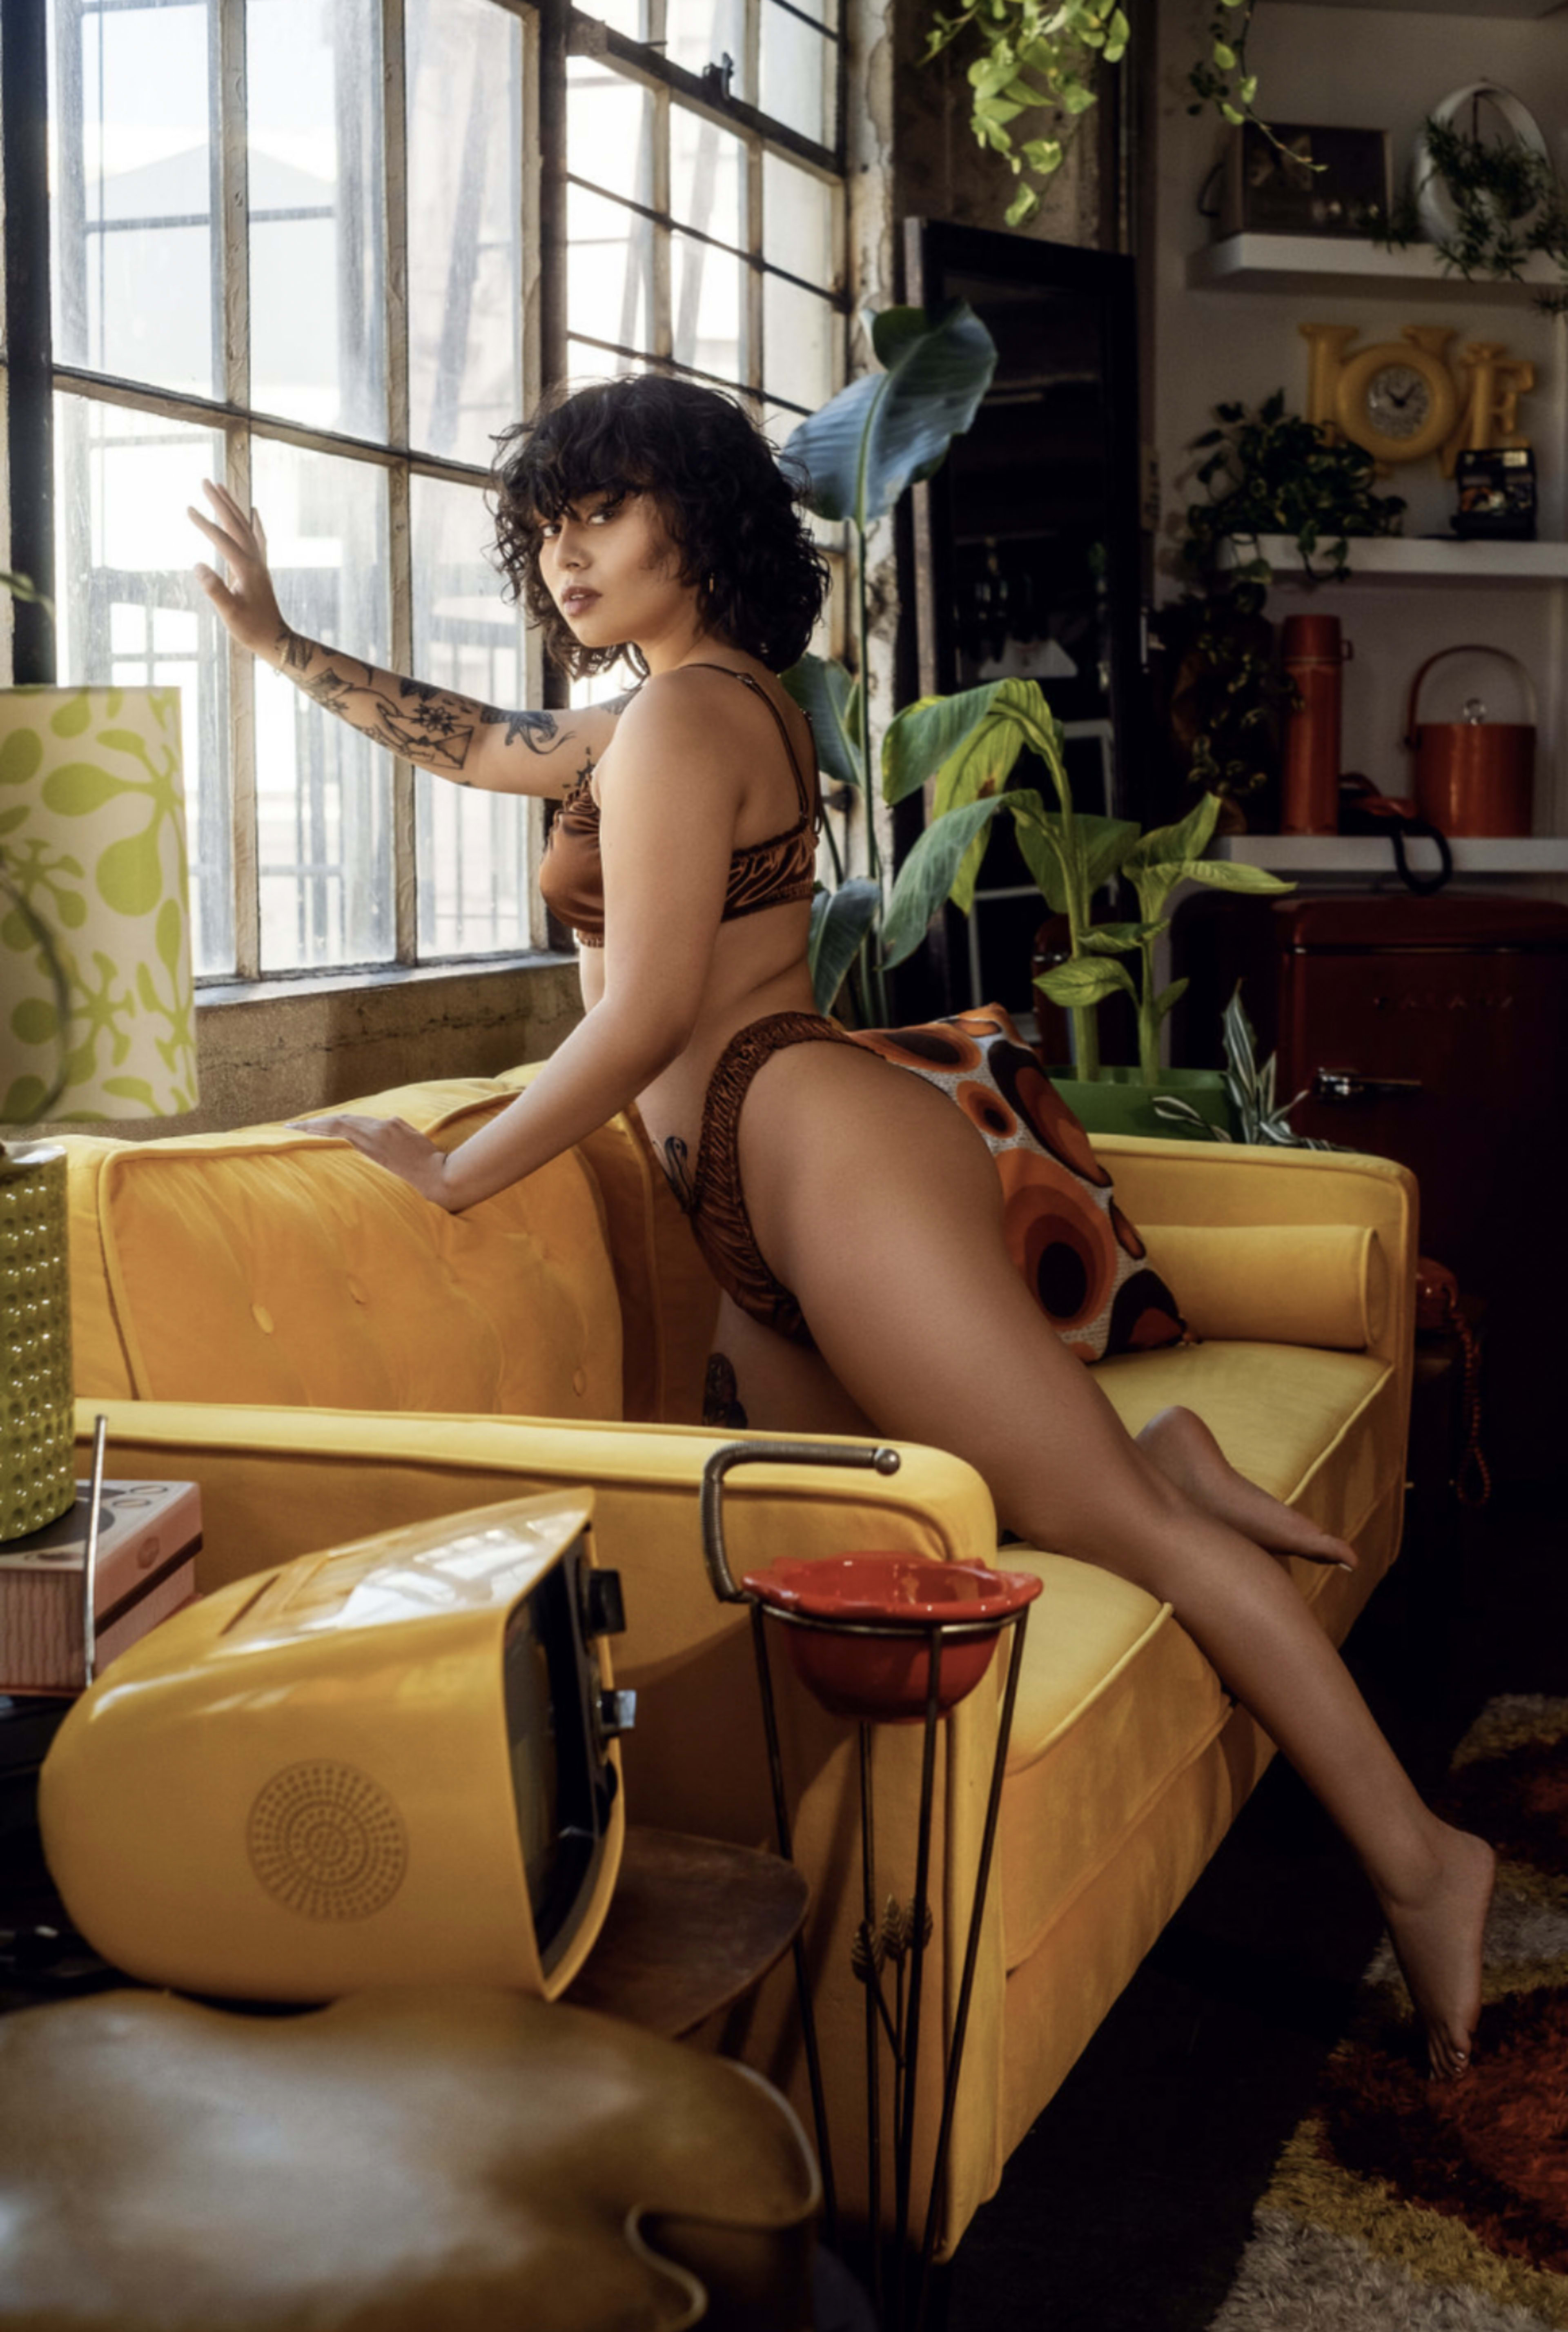 A woman posing on a yellow couch.